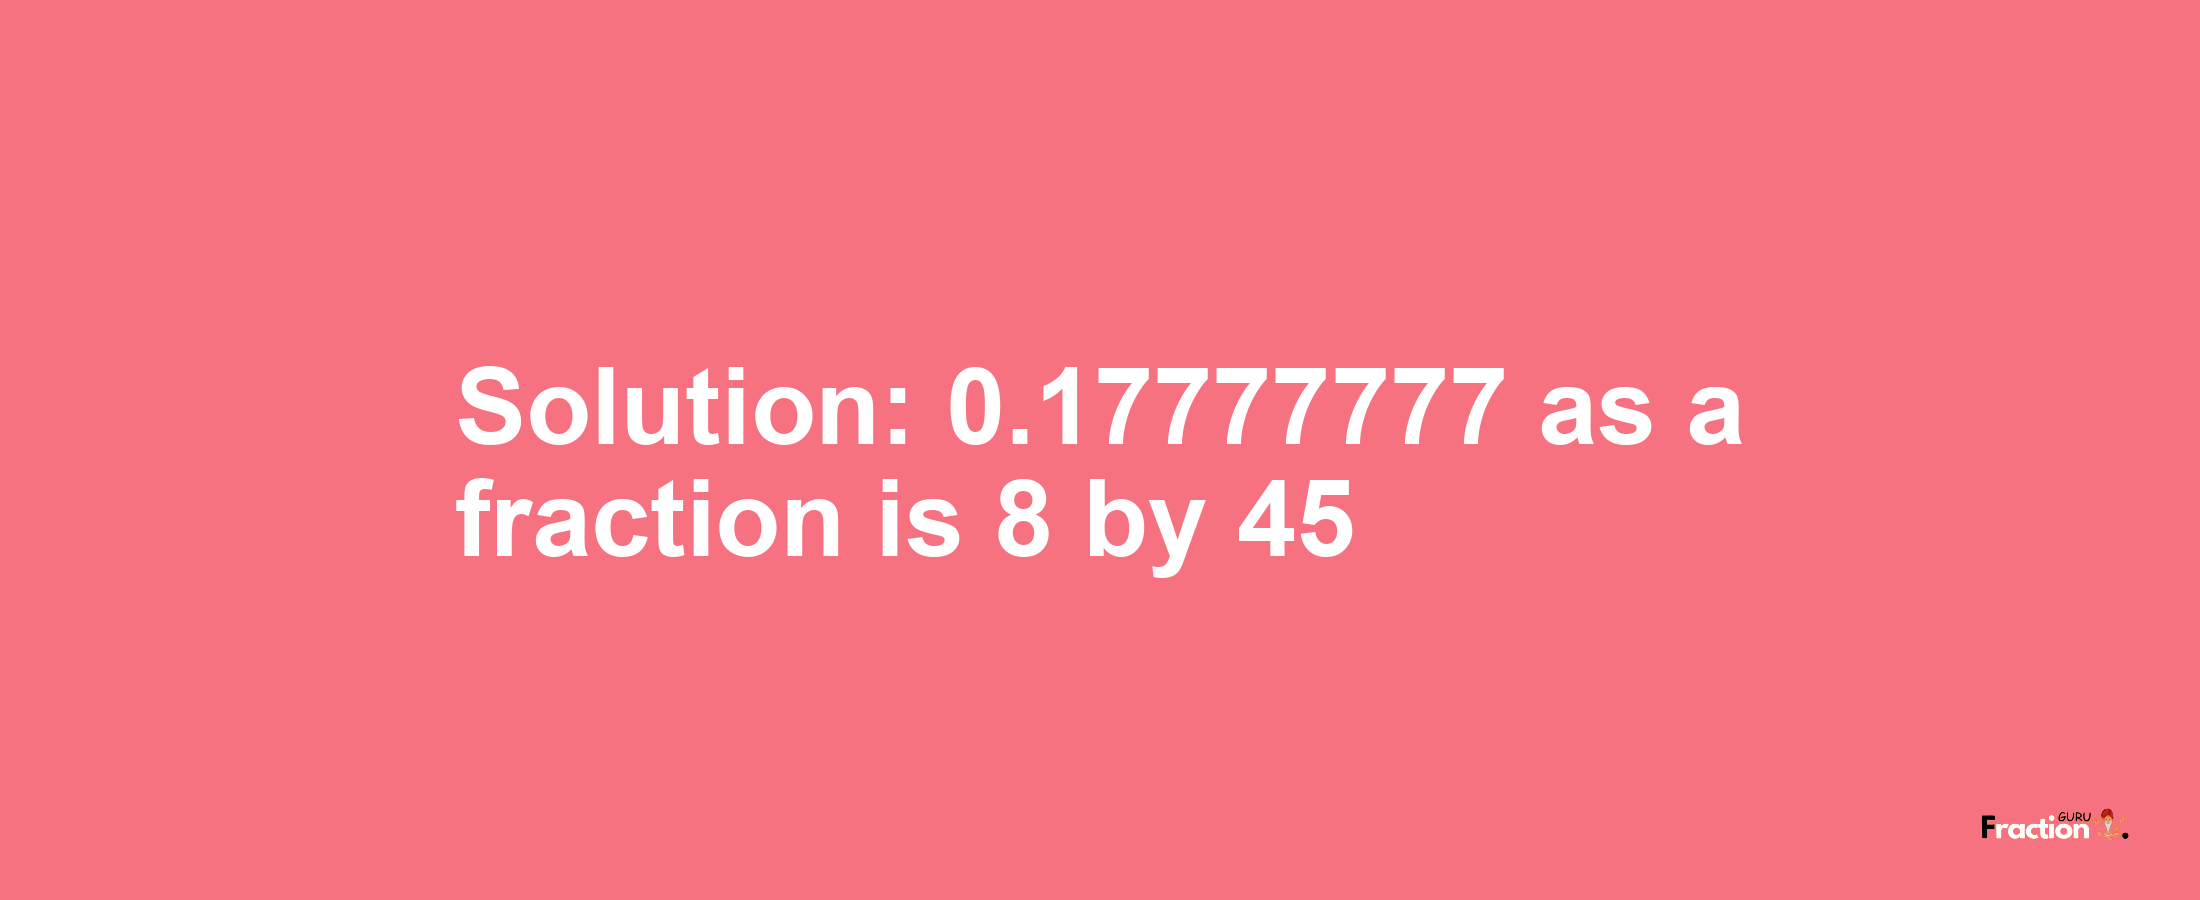 Solution:0.17777777 as a fraction is 8/45